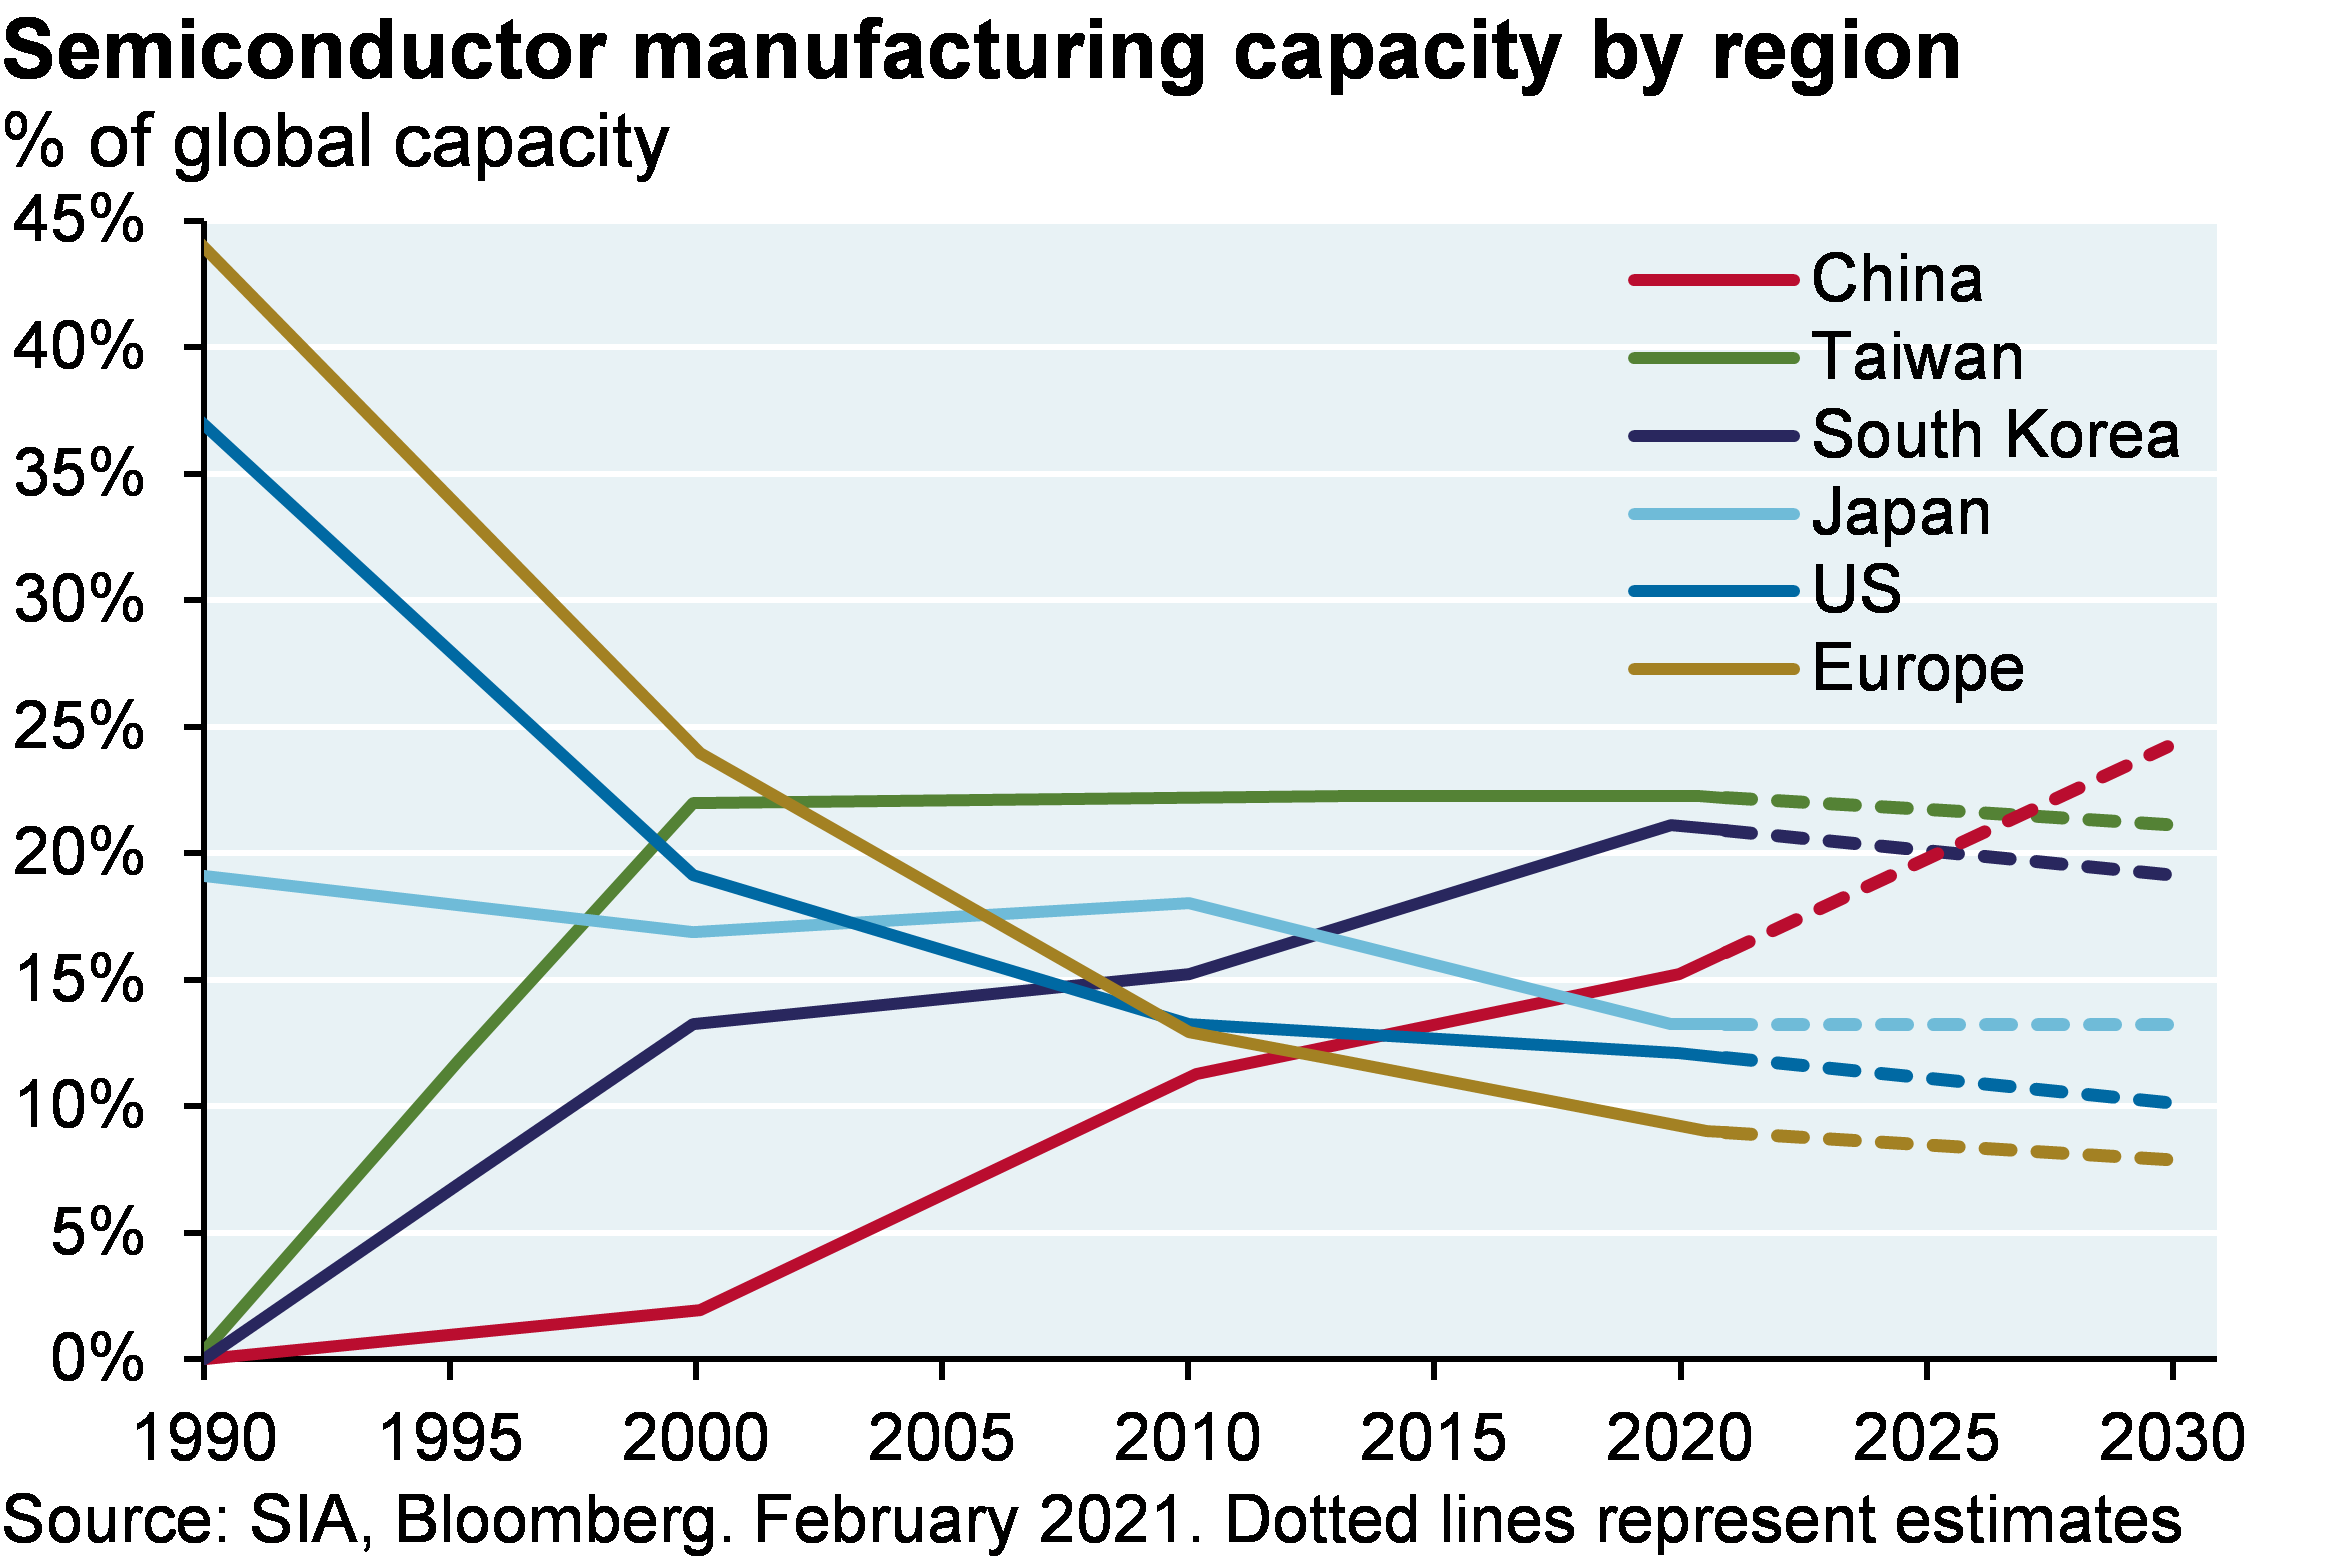 Line chart which shows semiconductor manufacturing capacity by region as % of global capacity. The chart includes China, Taiwan, South Korea, Japan, US and Europe since 1990 with estimates from 2021-2030. The chart shows that as of 2020, Taiwan has the highest share of global capacity at 21% and Europe has the lowest at ~9%.